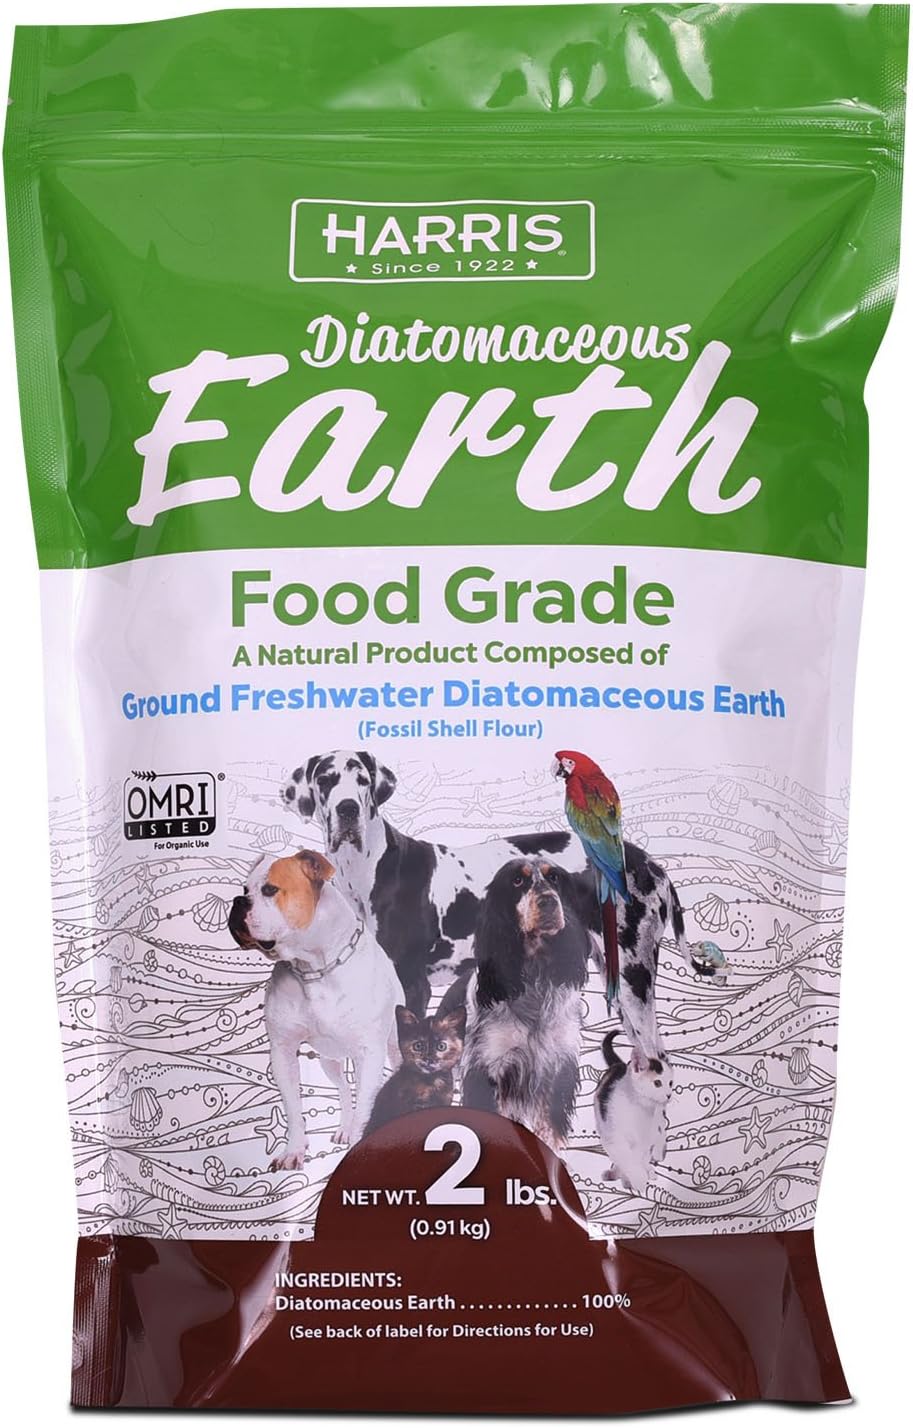 Harris Food Grade Diatomaceous Earth for Pets, for Cats, Dogs, Horses and Pets, 2lb